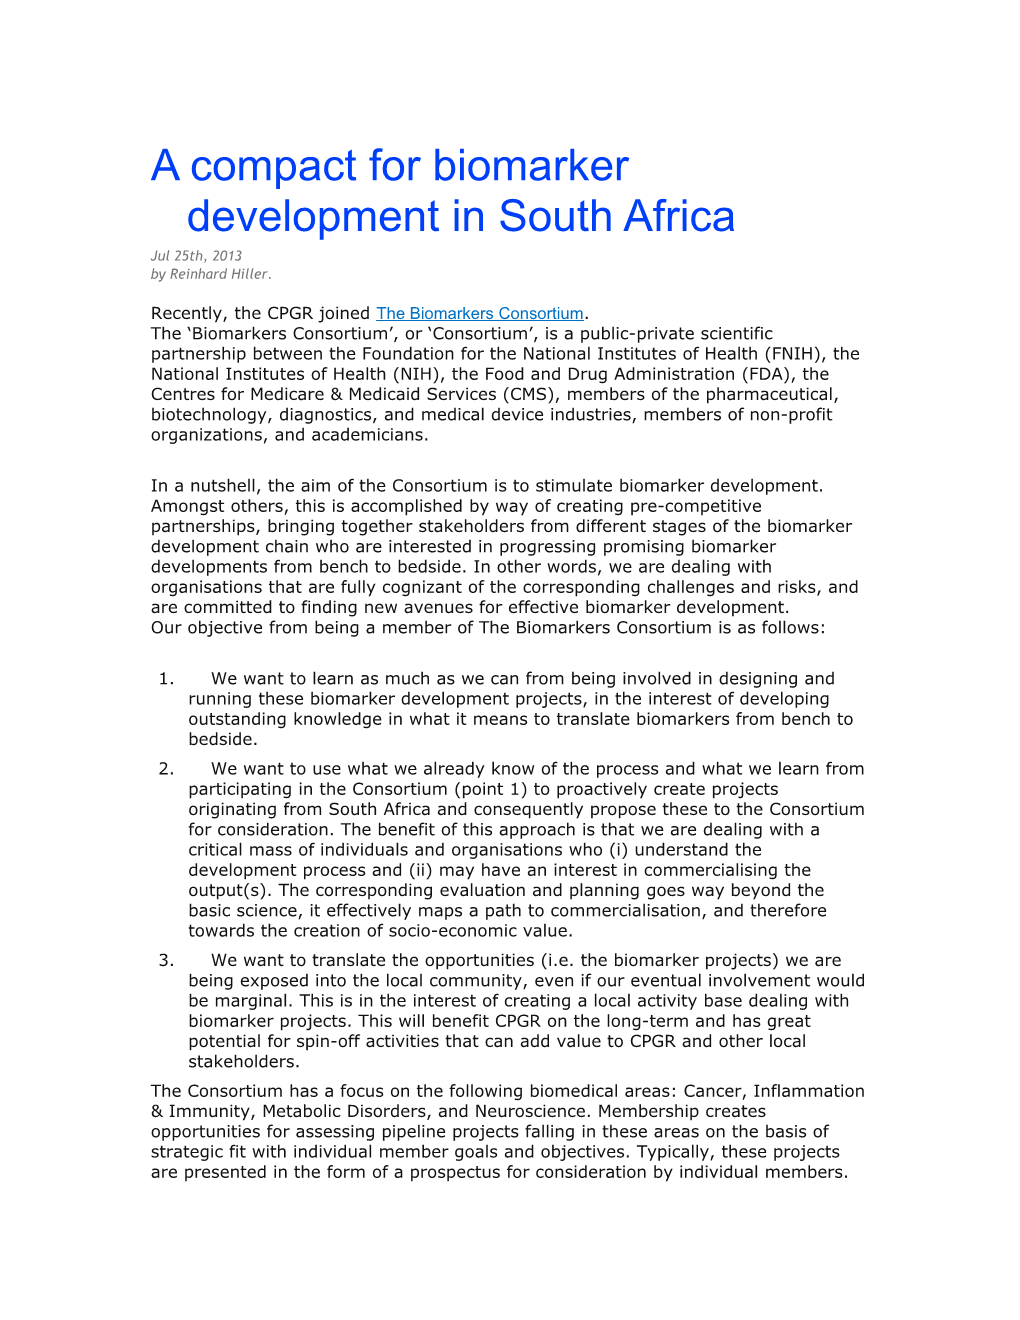 A Compact for Biomarker Development in South Africa